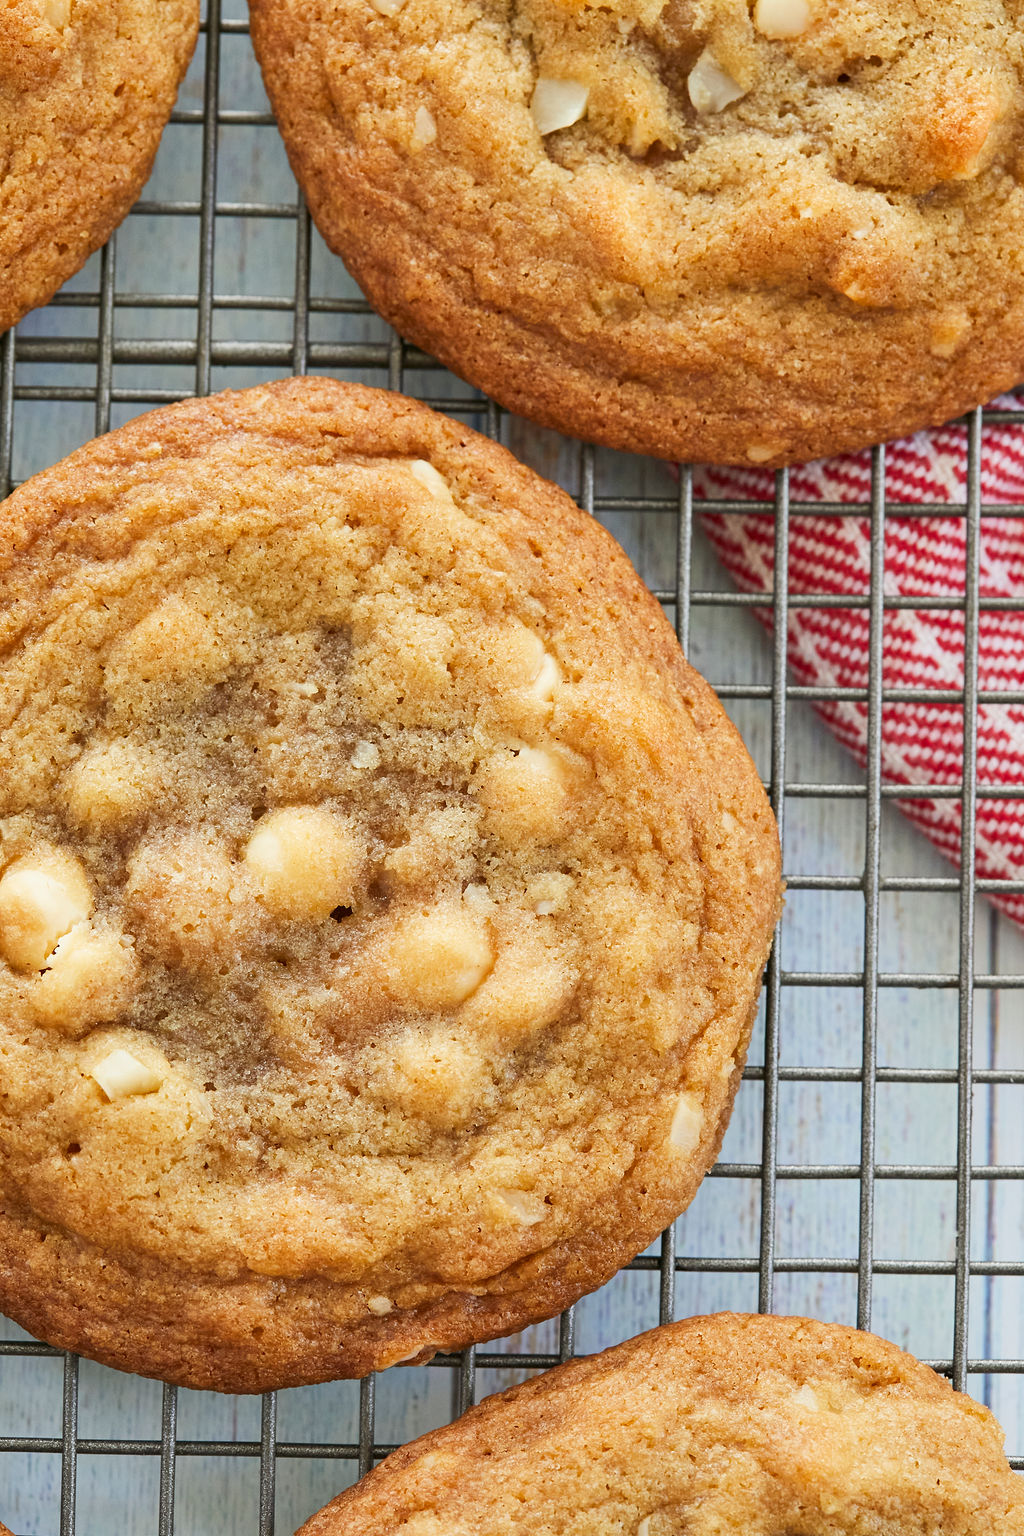 A top-down view of a white chocolate macadamia nut cookie to show perfect texture and consistency.